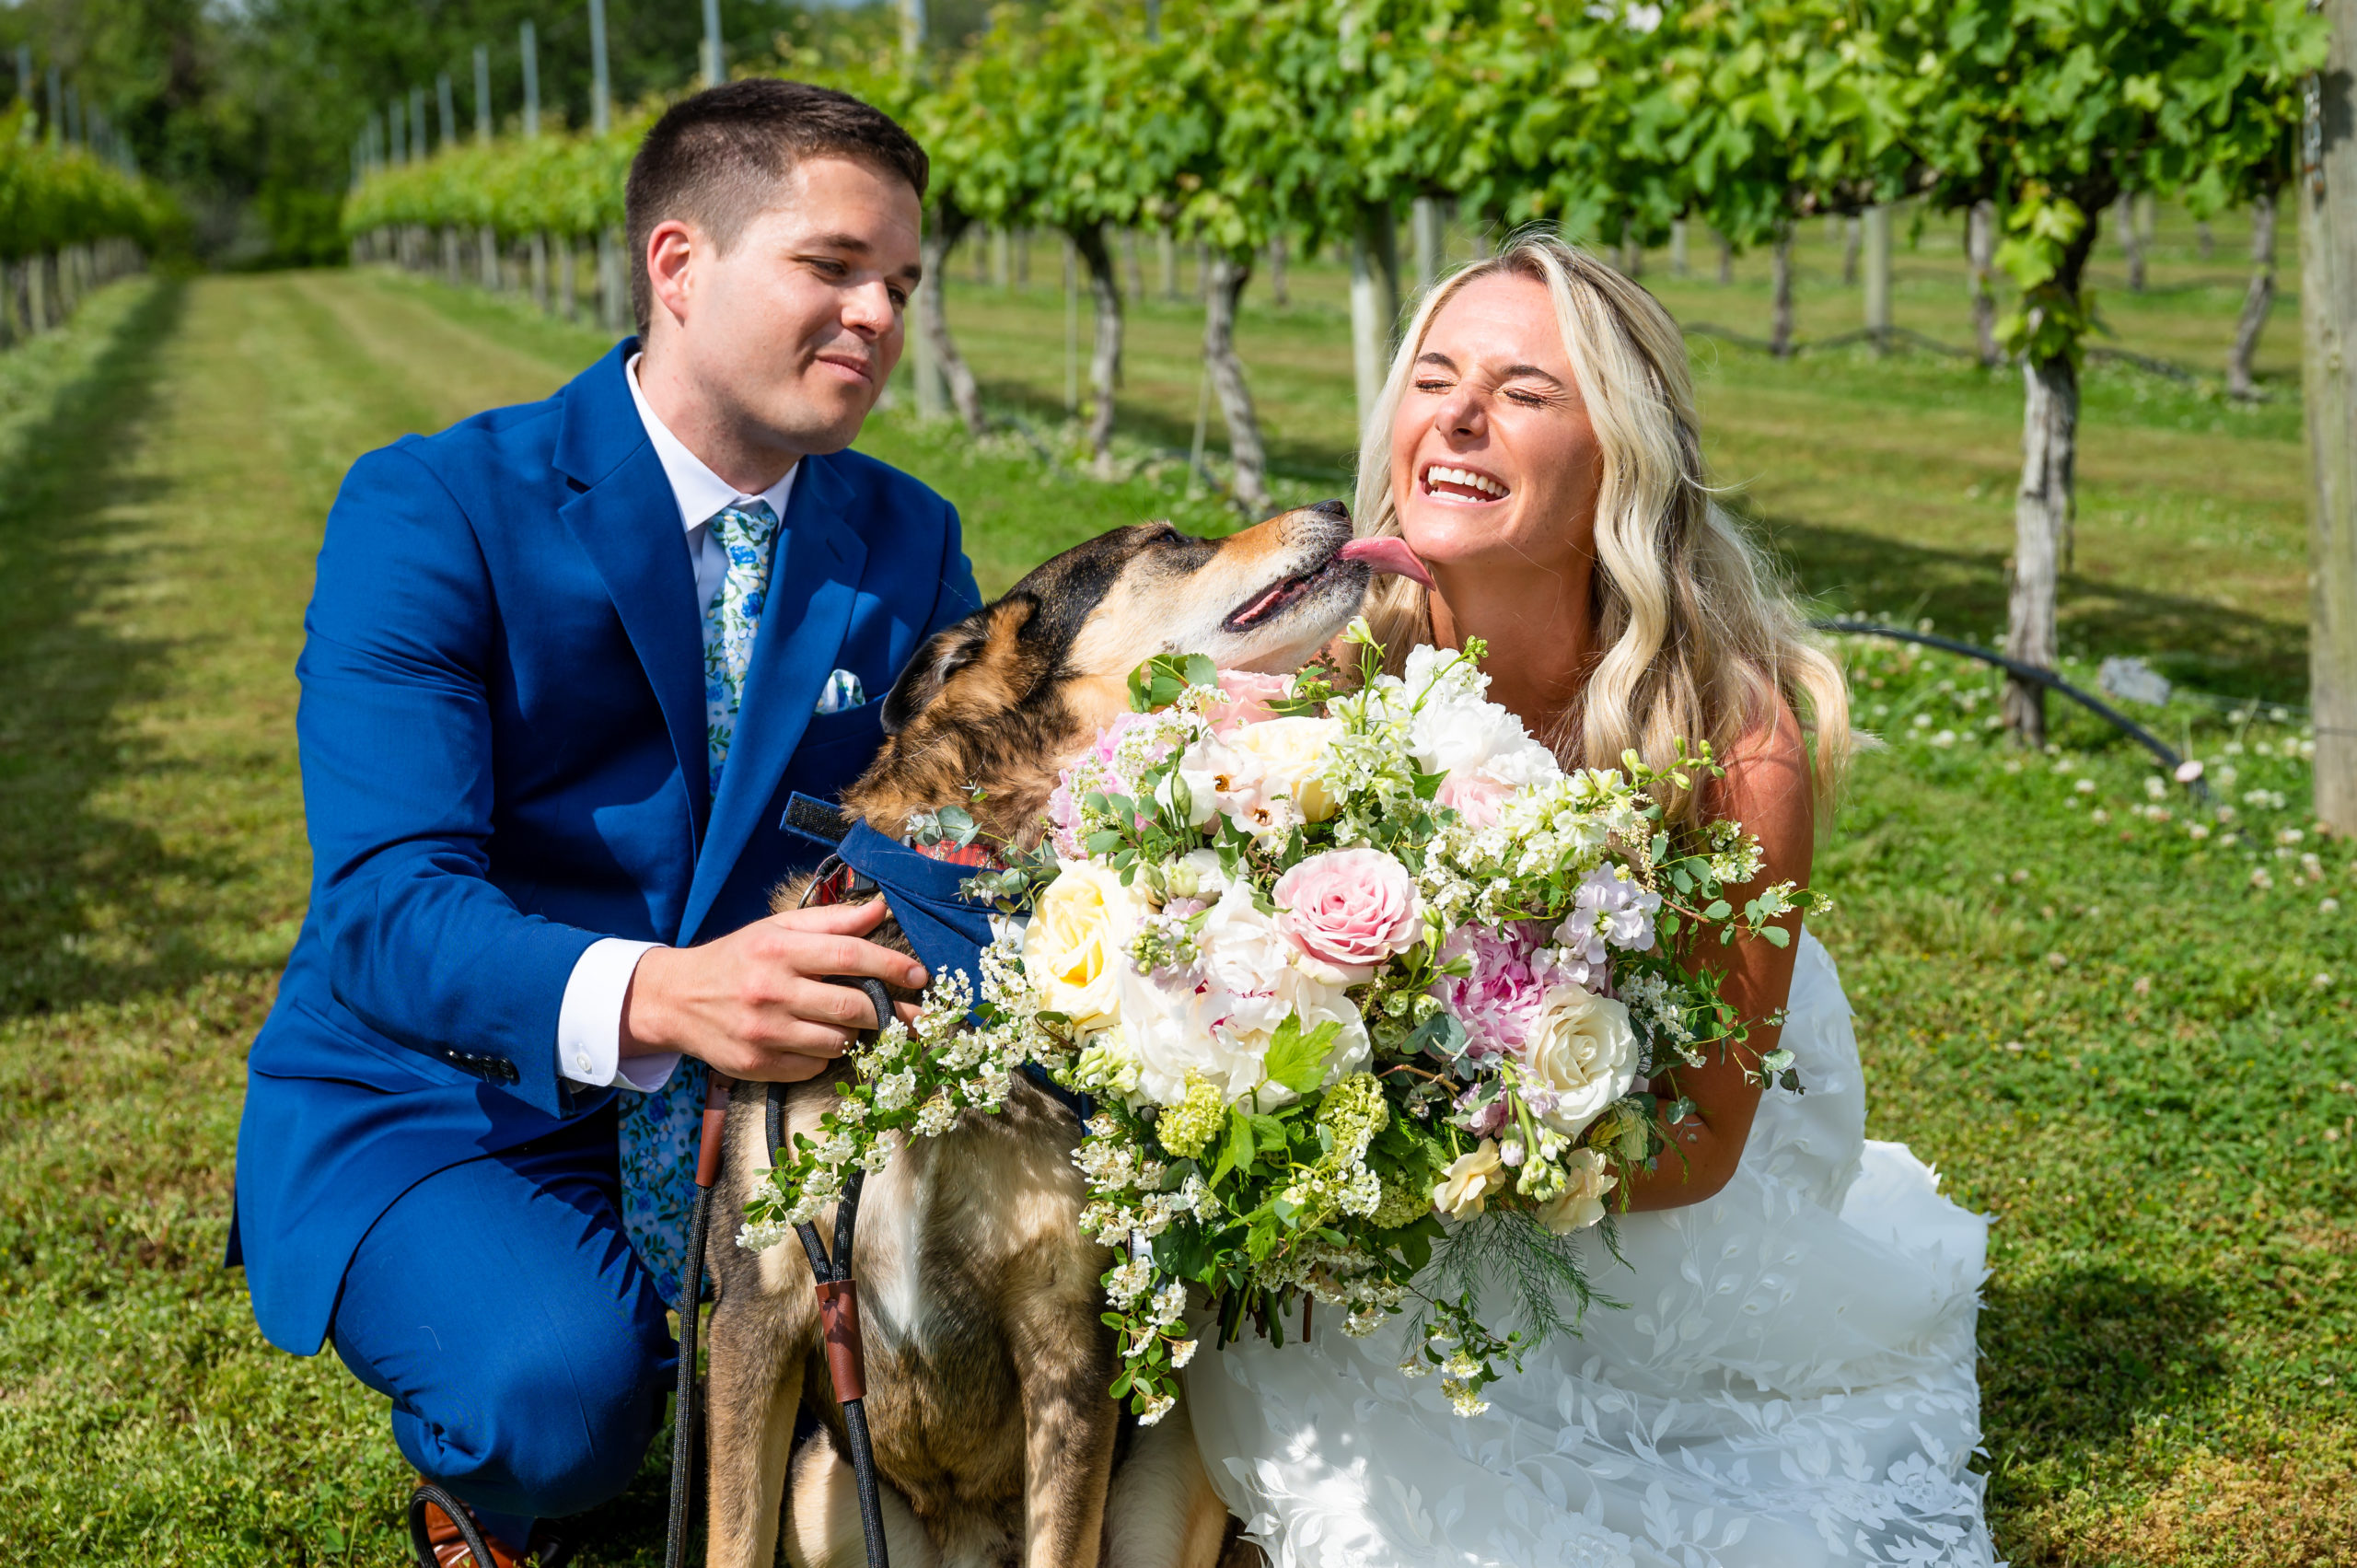 Wedding photo with the couple's dog at Willow Creek Winery in Cape May NJ